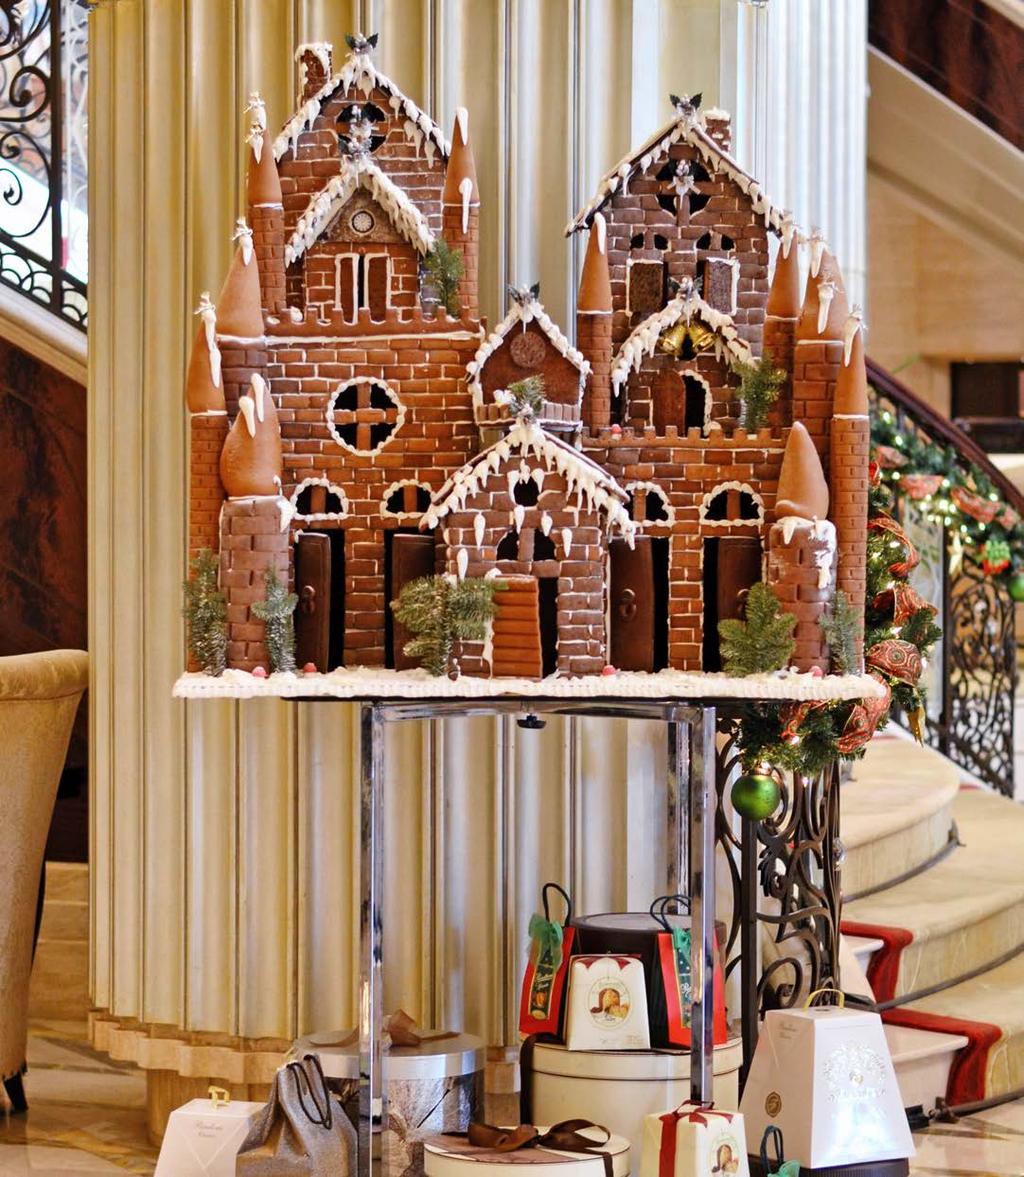 Gingerbread House Workshop Thursday, 7th December 04:00 pm 06:00 pm The Terrace on the Corniche Exclusively for Santa s little helpers our much loved Gingerbread house workshop for children returns